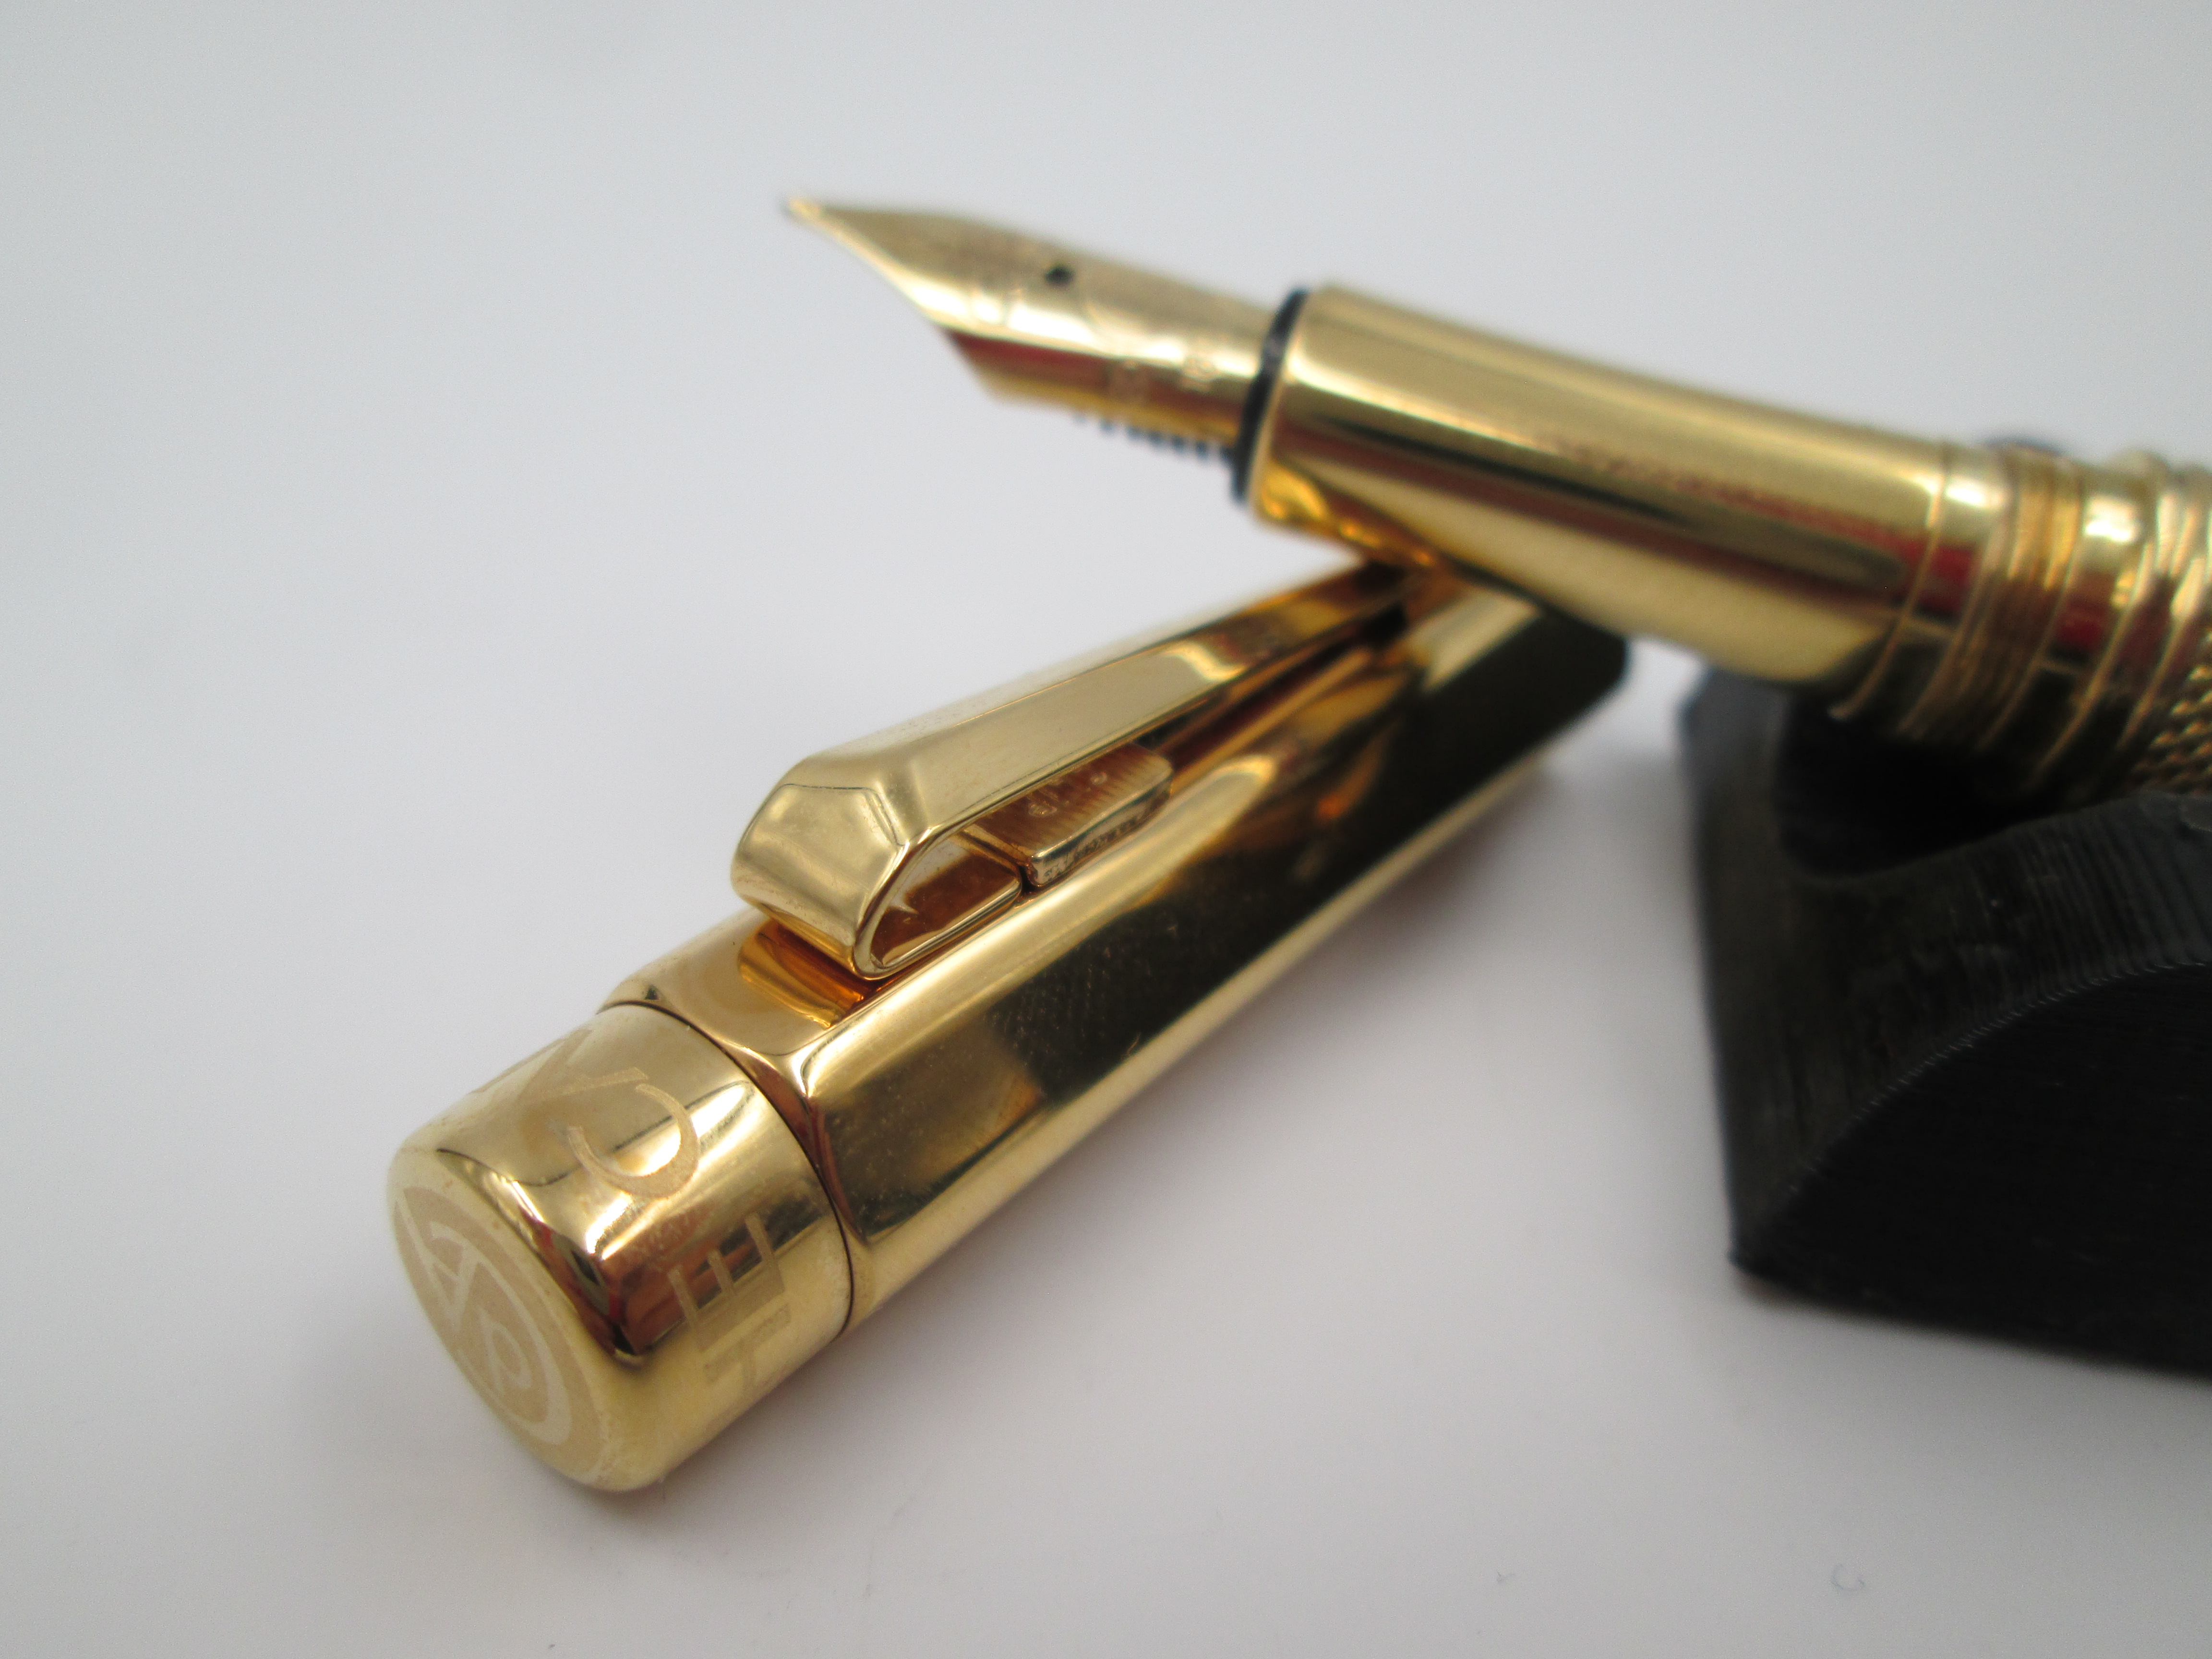 Ivanhoe Yellow 18ct Gold Limited Edition Pens by Caran d'Ache